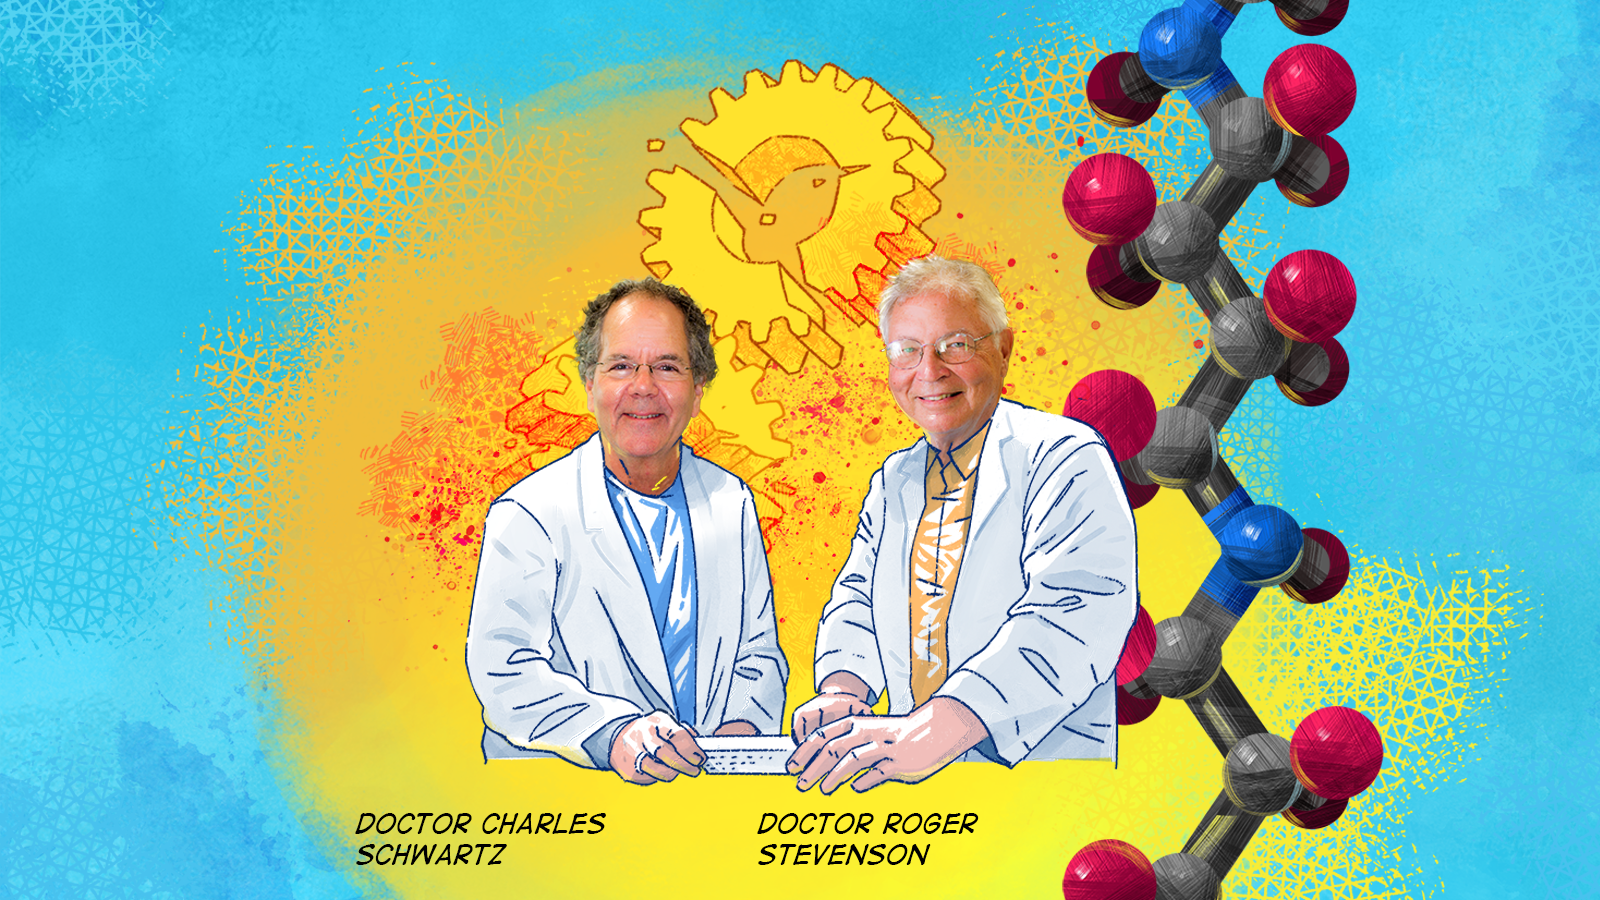 Illustrations of doctors Charles Schwartz and Roger Stevenson with images of molecules and gears.